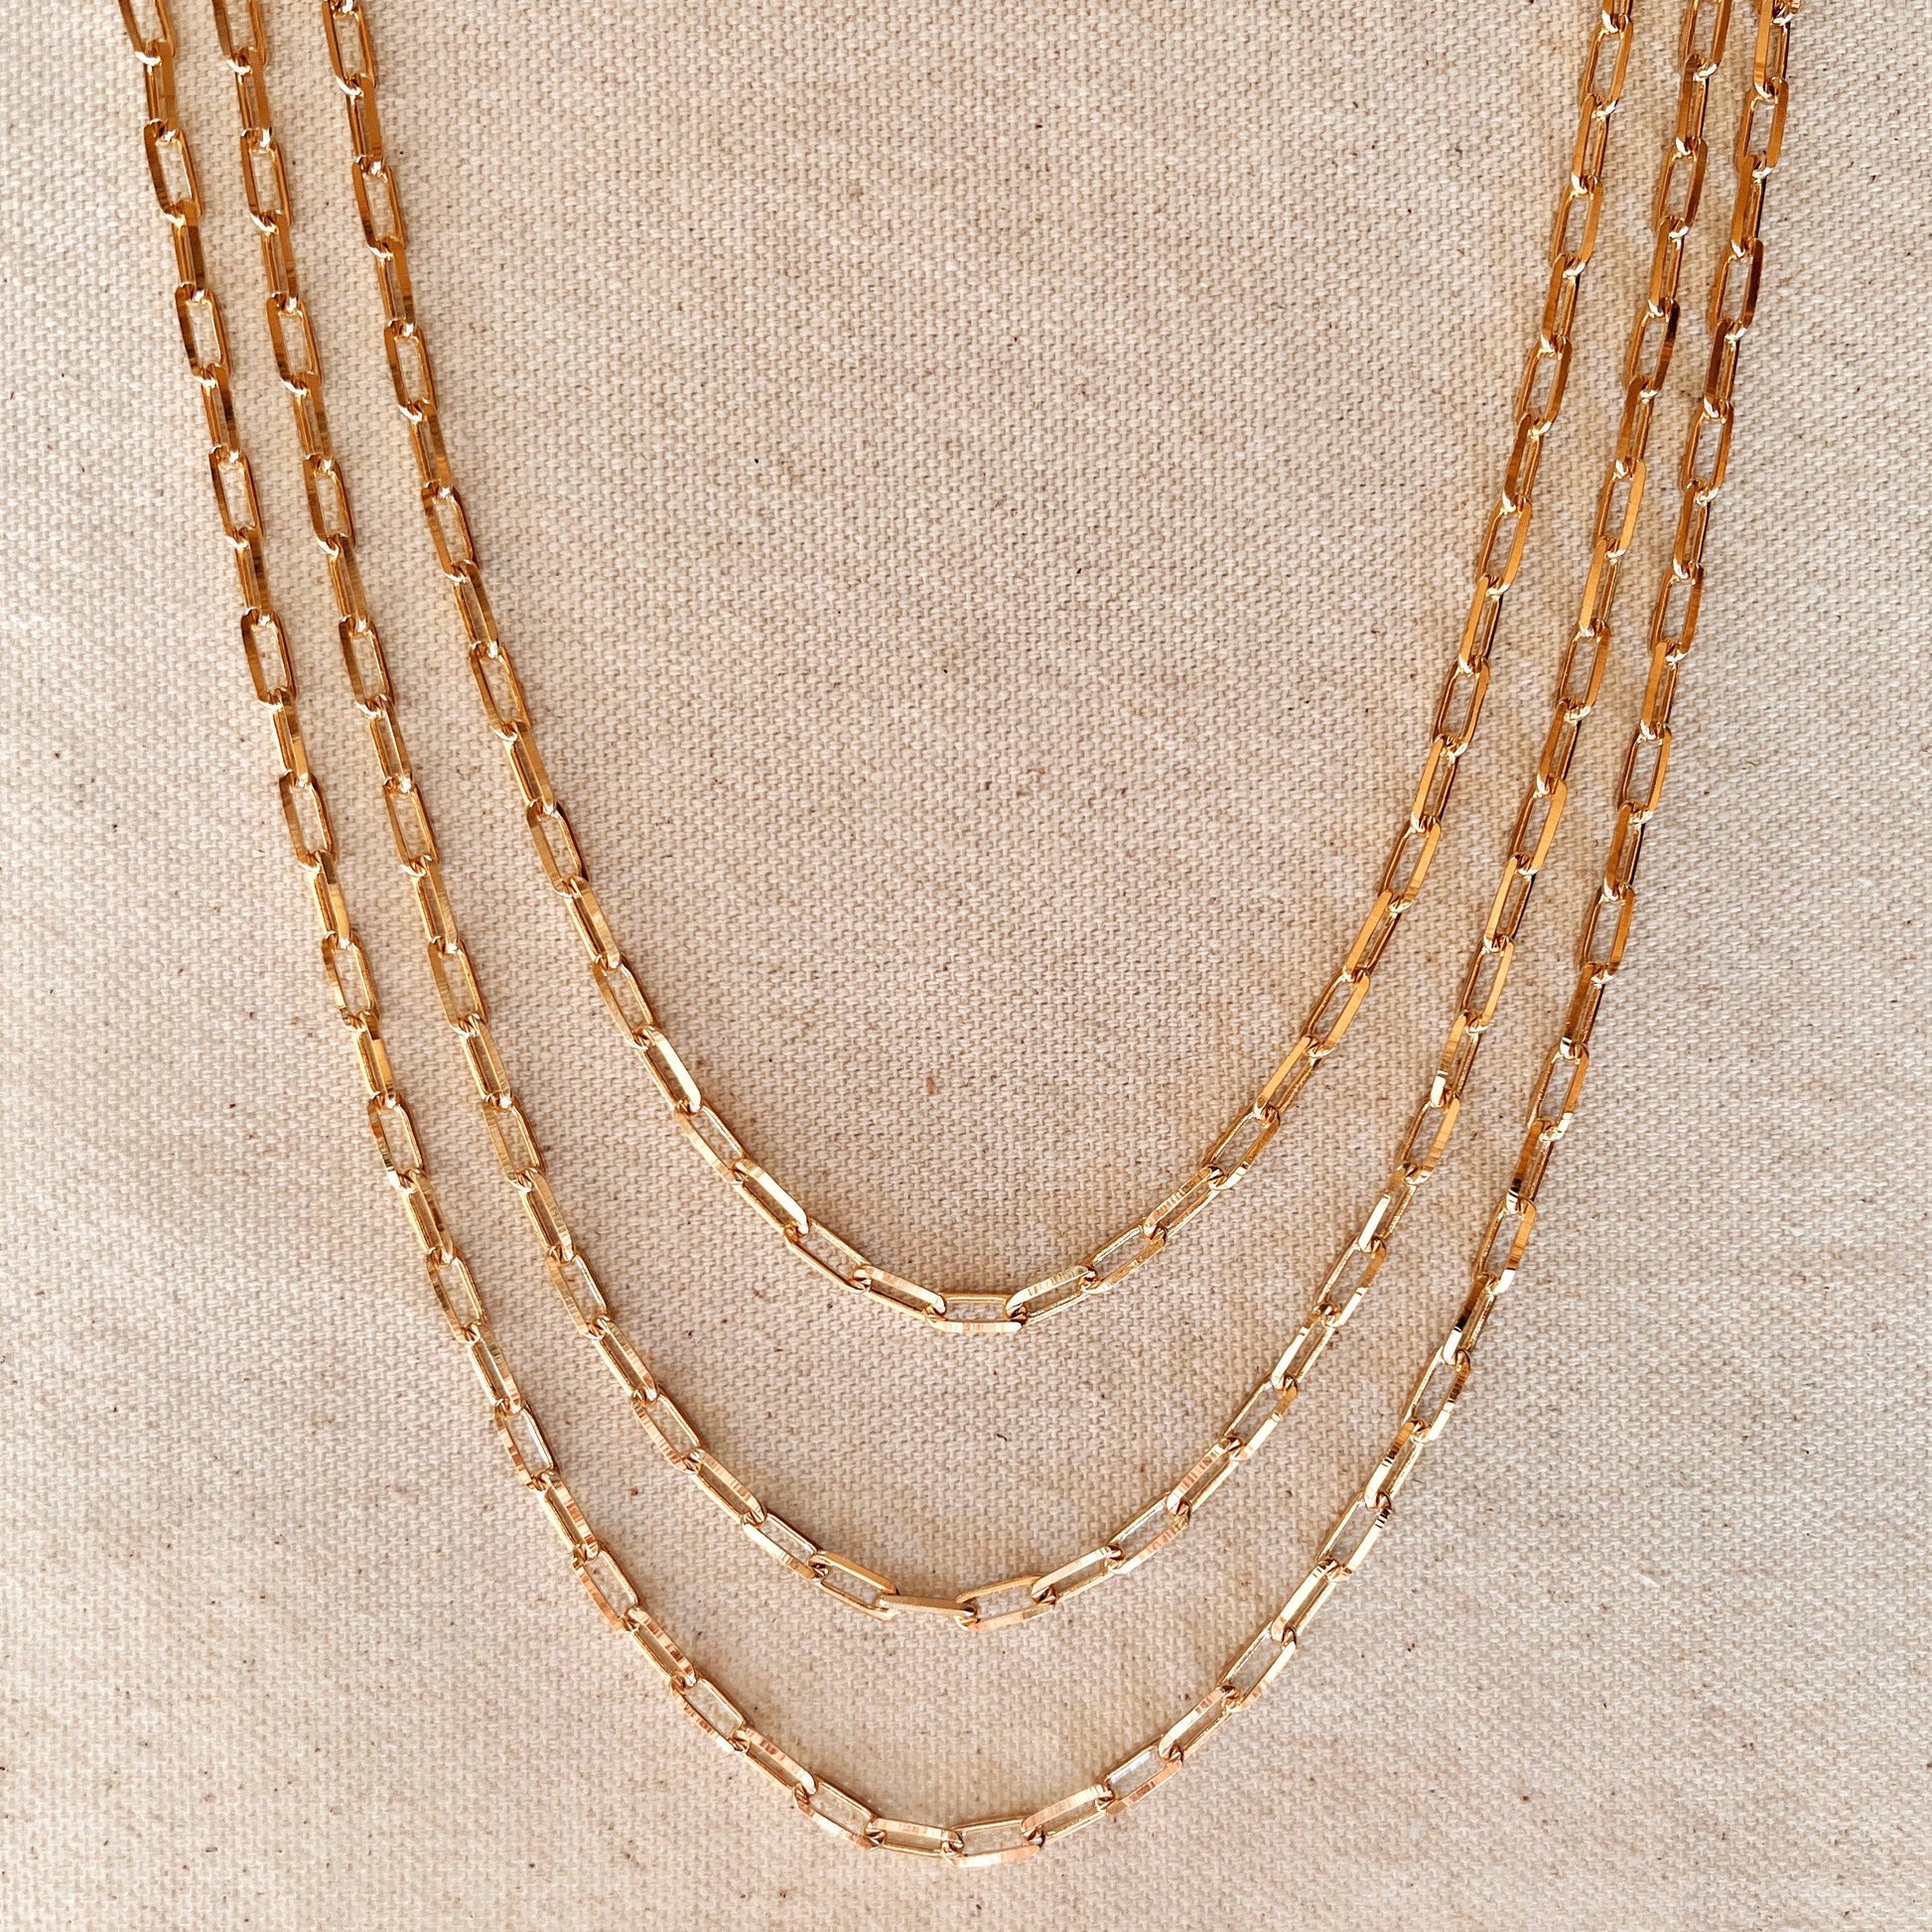 14k Gold Filled Chain Foot  14k Gold Filled Chain Wholesale - 100